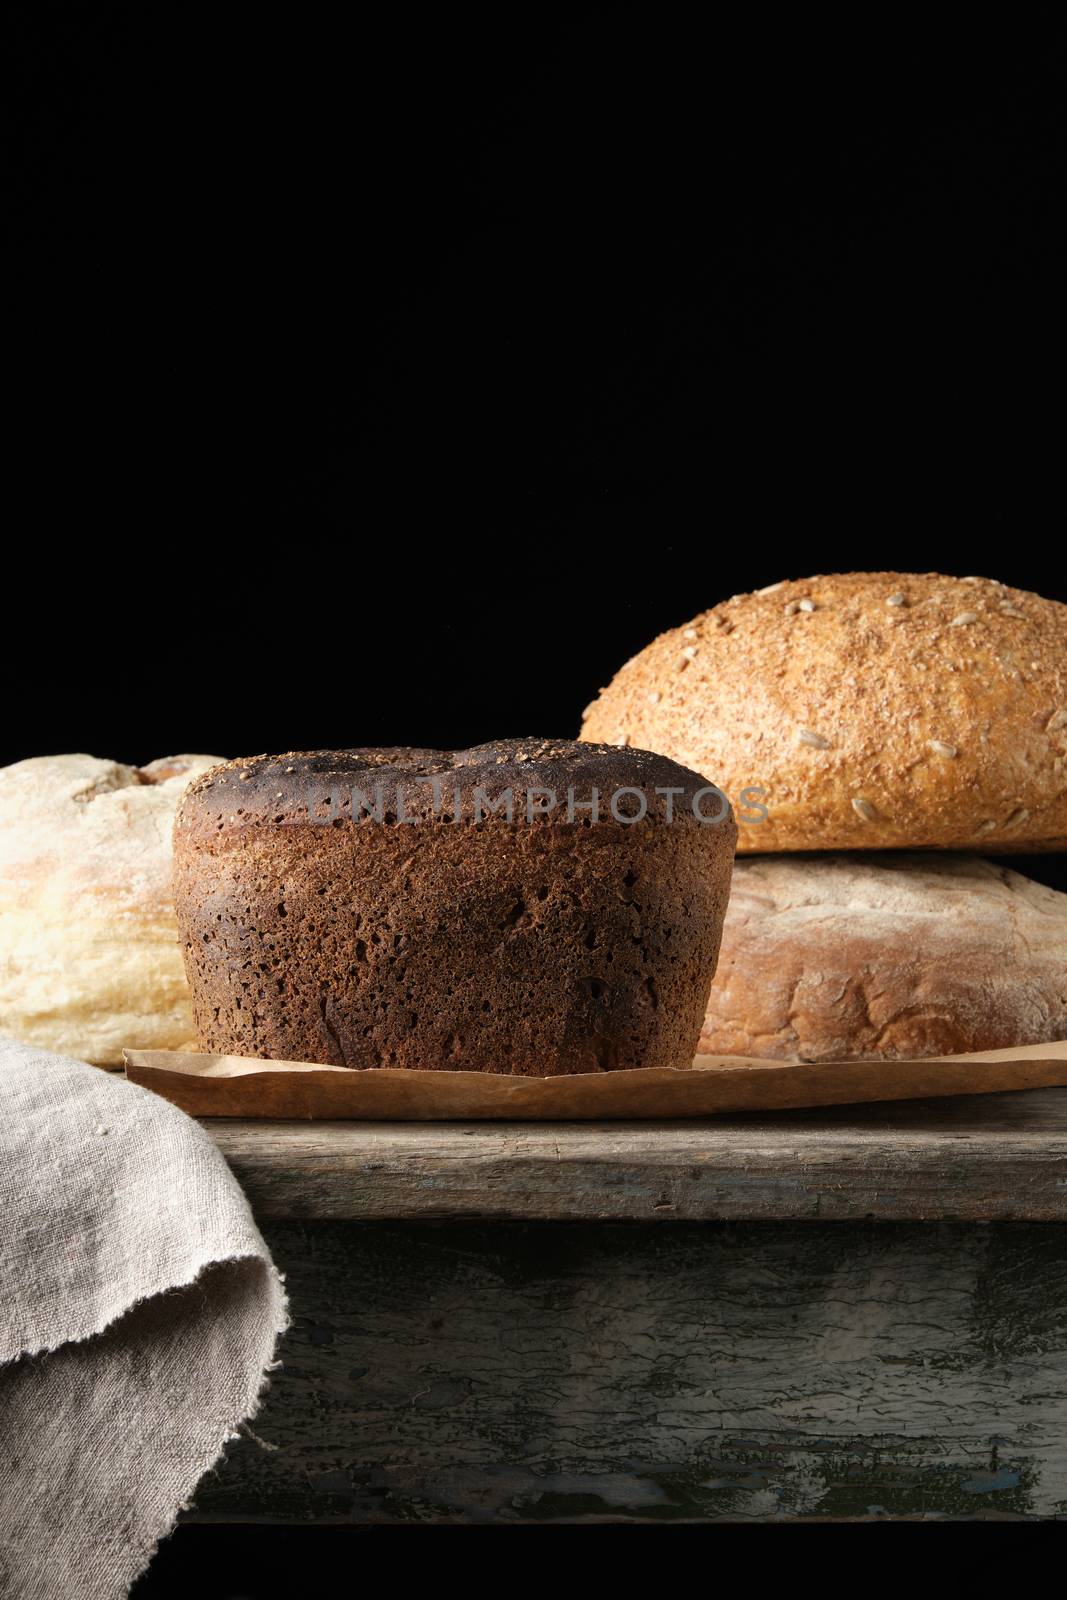 baked rye flour bread on a wooden table, dark background